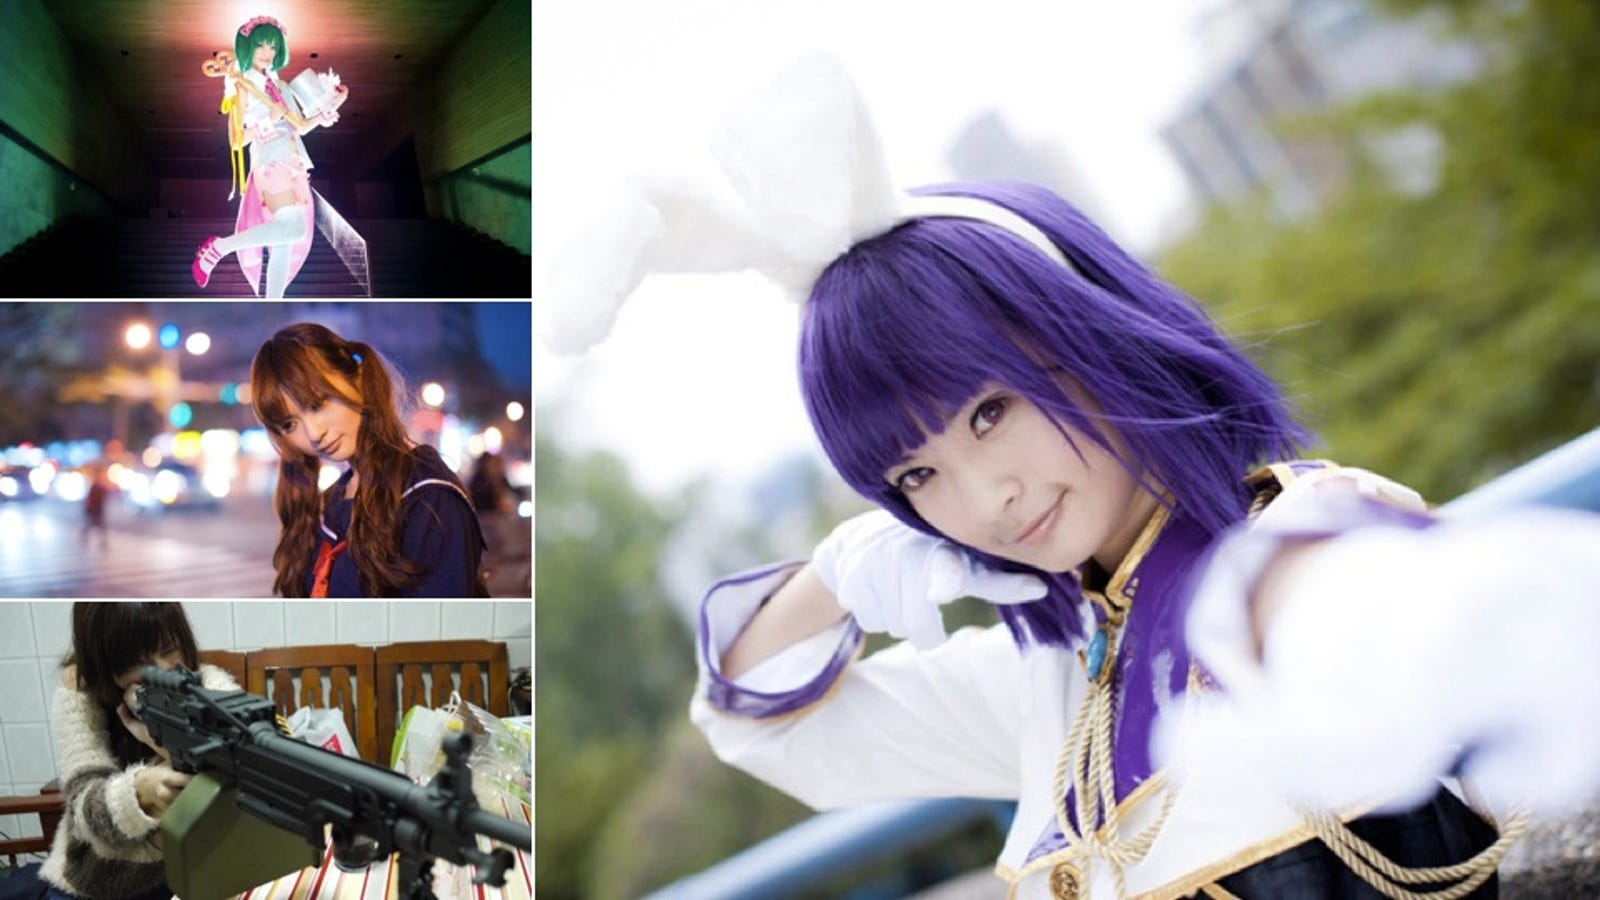 The Taiwanese Cosplayer Sweeping The Internet